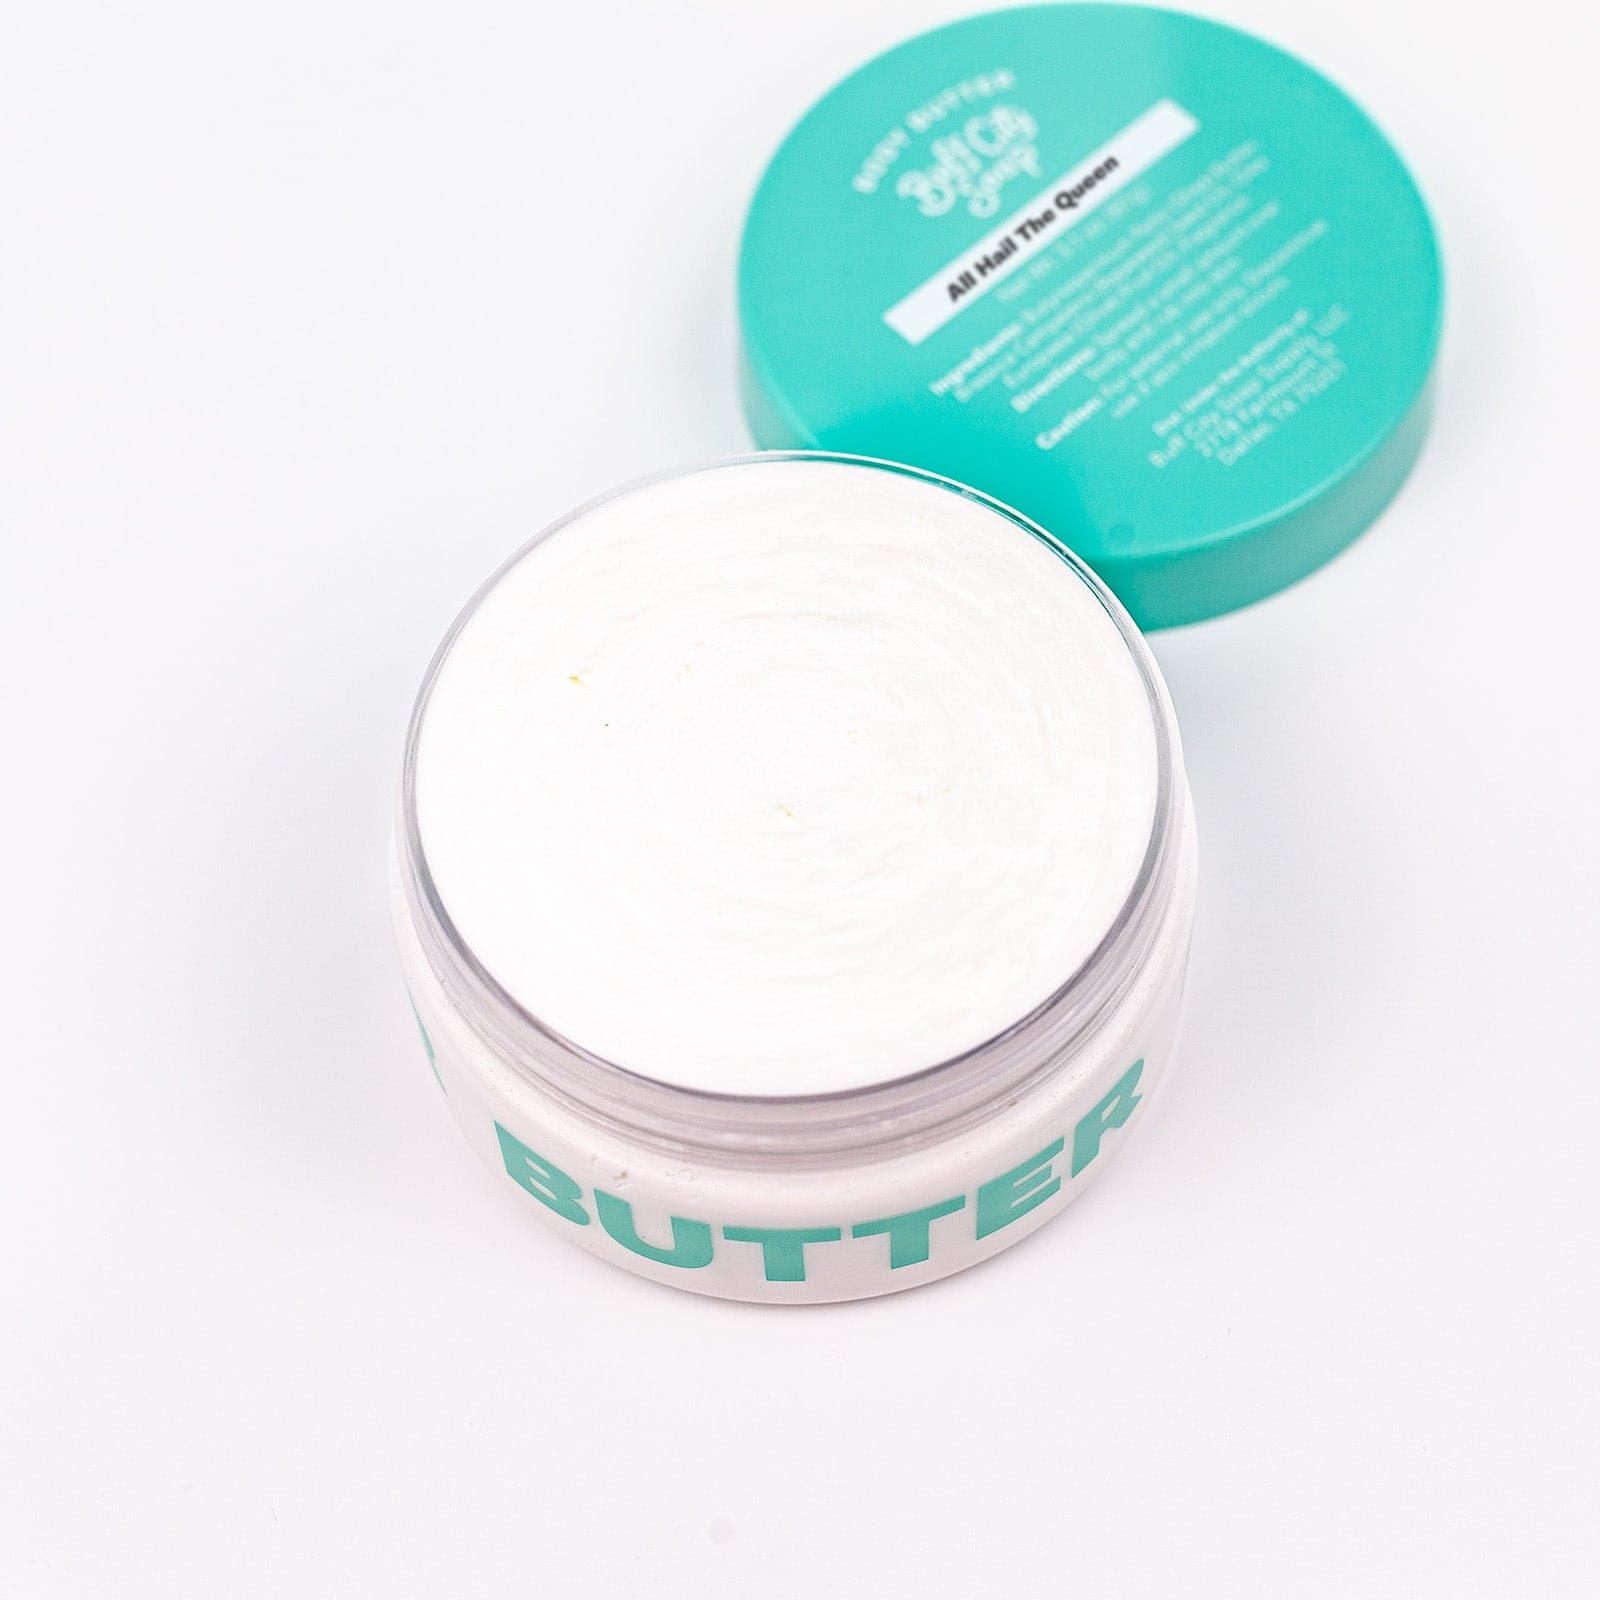 All Hail The Queen Body Butter container with teal lid off against white background